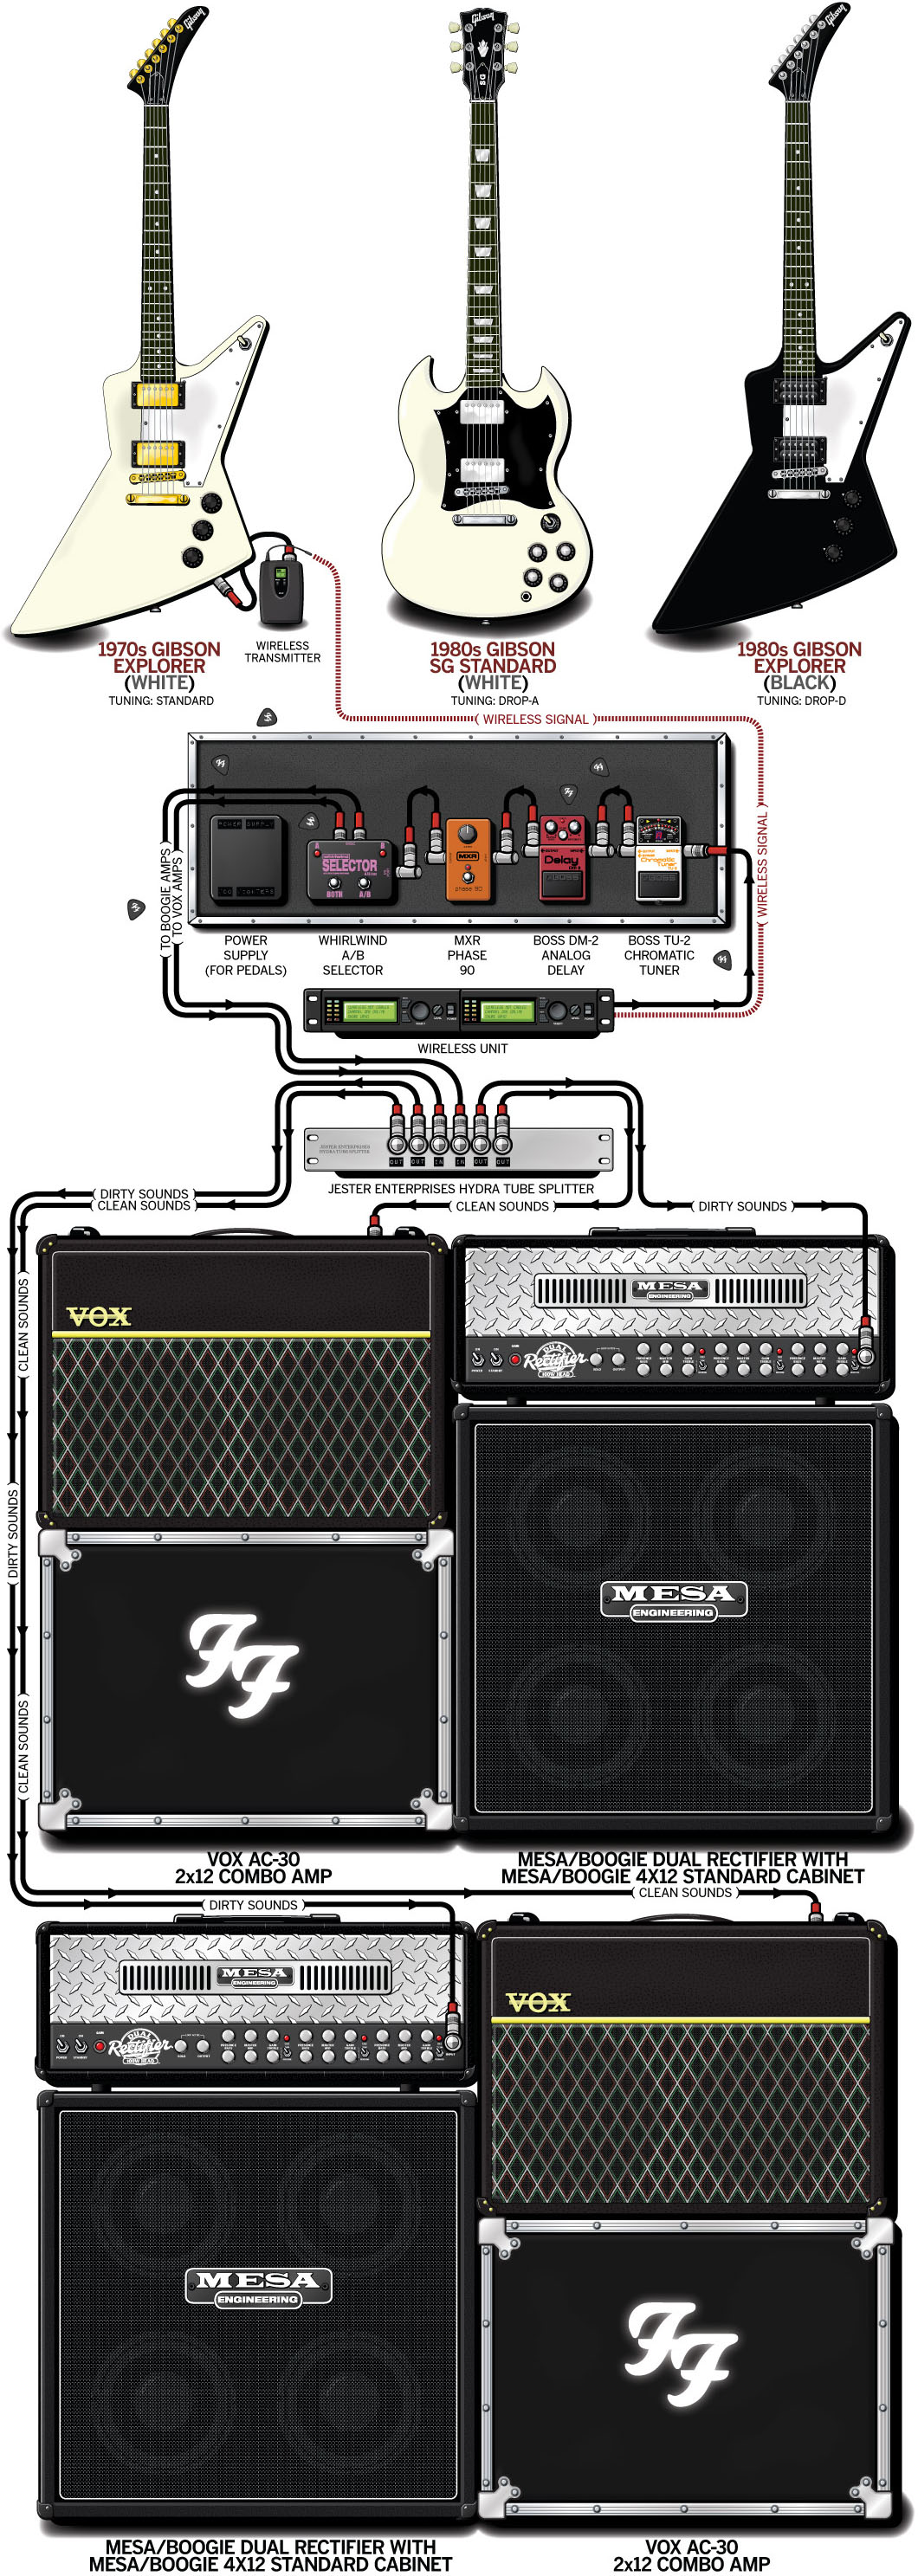 Dave Grohl Guitar Gear & Rig – Foo Fighters – 2000